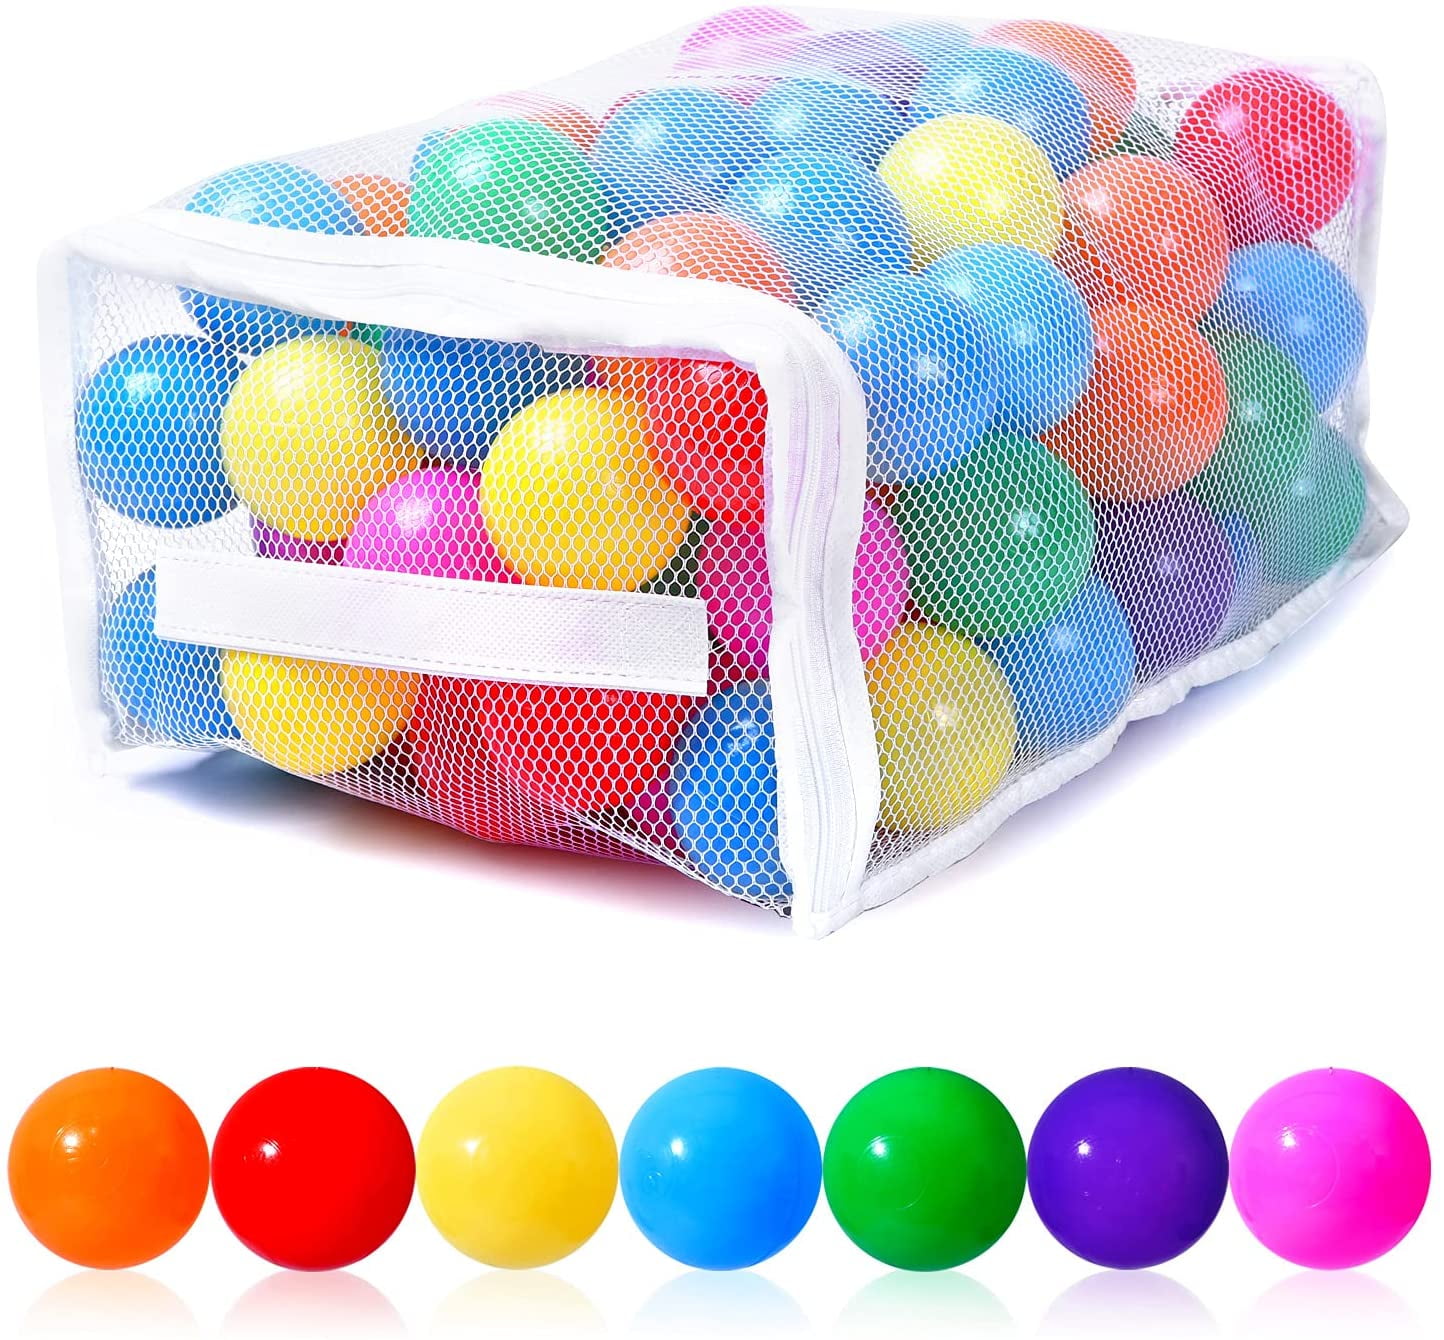 Baby Kids Plastic Colorful Play Balls For Ball Pit Ocean Swim Pool Toy 100Pcs OB